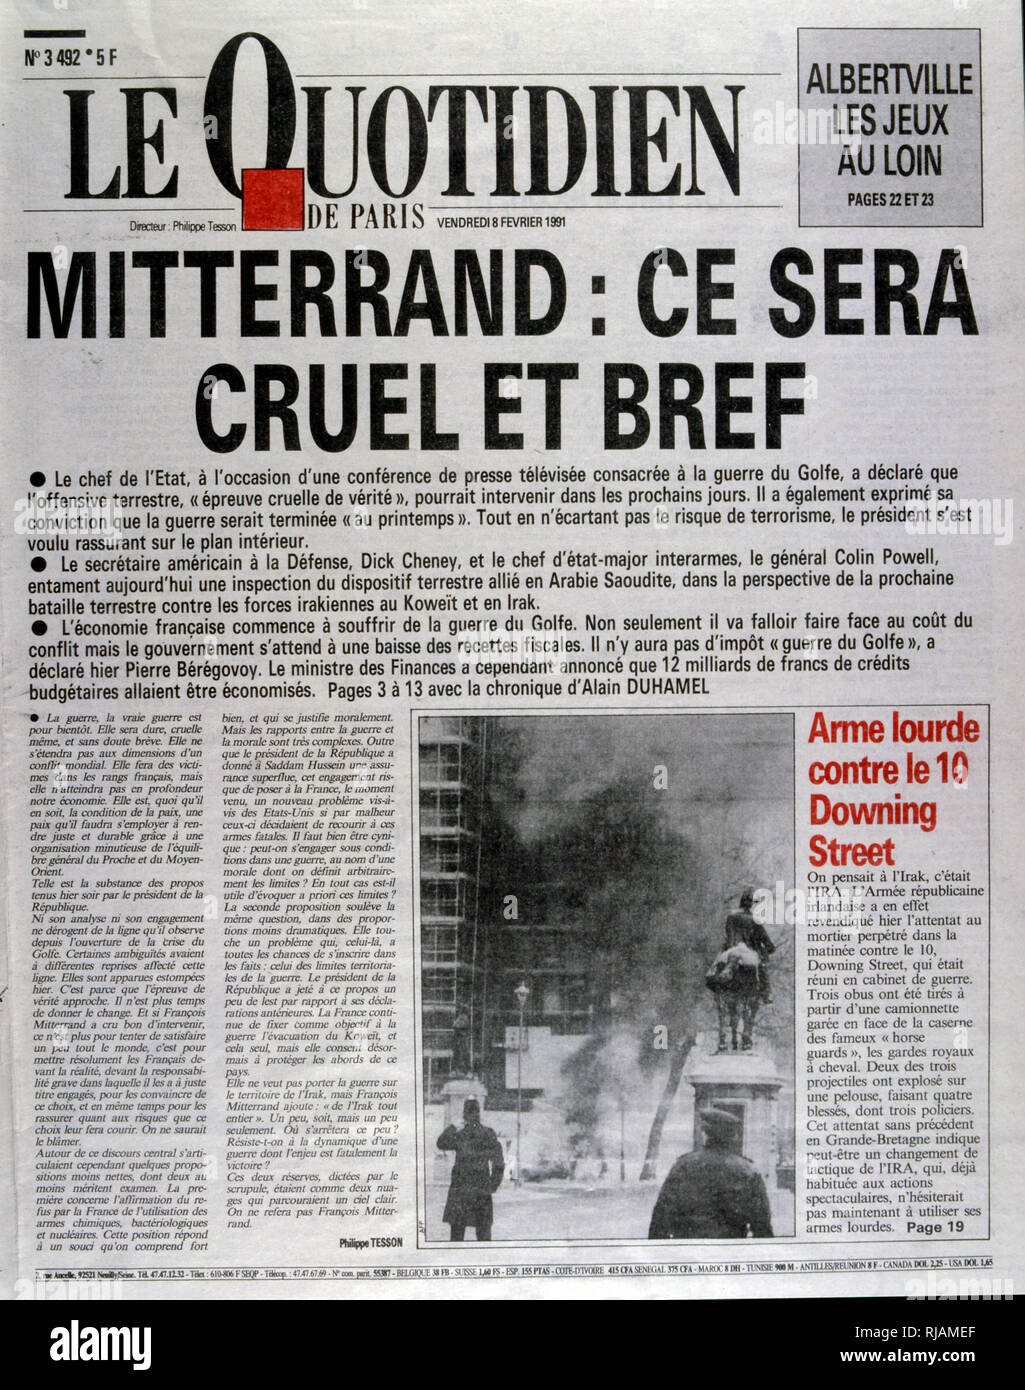 President Mitterrand outlines his position on the Gulf War 1991 Front page of the French newspaper 'Le Quotidien' 8th February 1991. The Gulf War (2 August 1990 - 28 February 1991), codenamed Operation Desert Shield and Operation Desert Storm, was a war waged by coalition forces from 35 nations led by the United States against Iraq in response to Iraq's invasion and annexation of Kuwait. Stock Photo